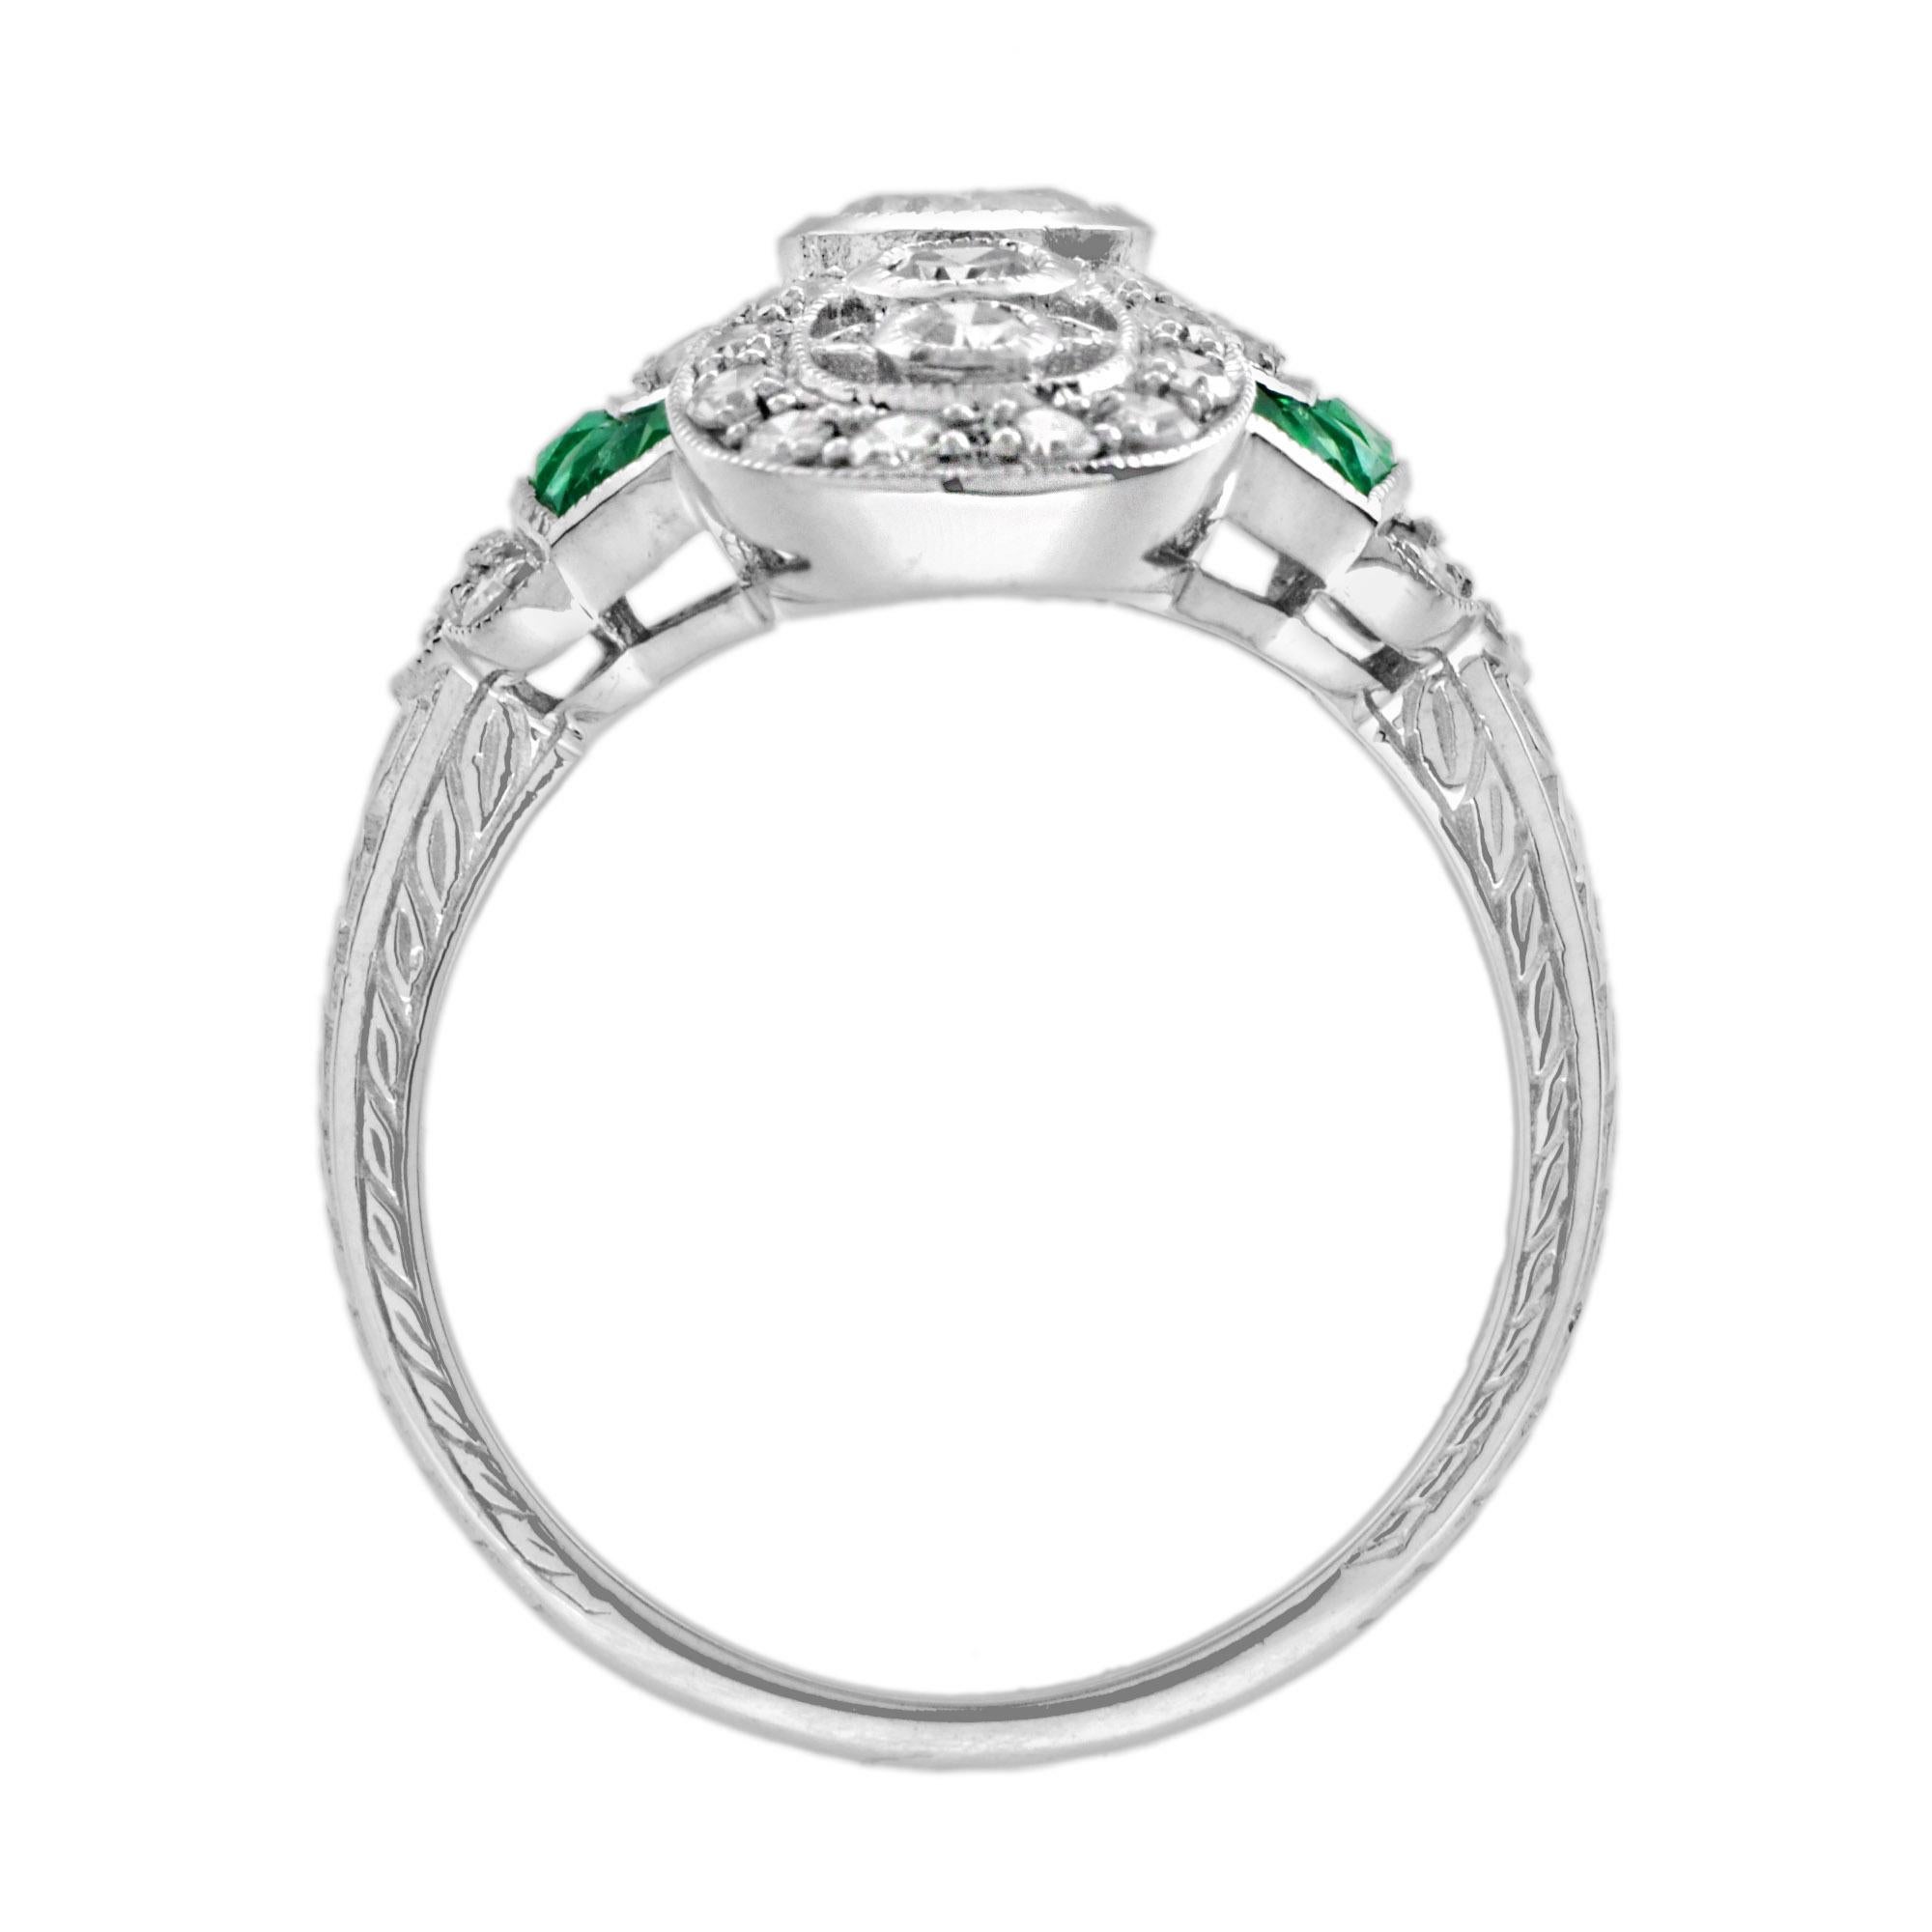 Art Deco Style Diamond and Emerald Cocktail Ring in 18k White Gold For Sale 1